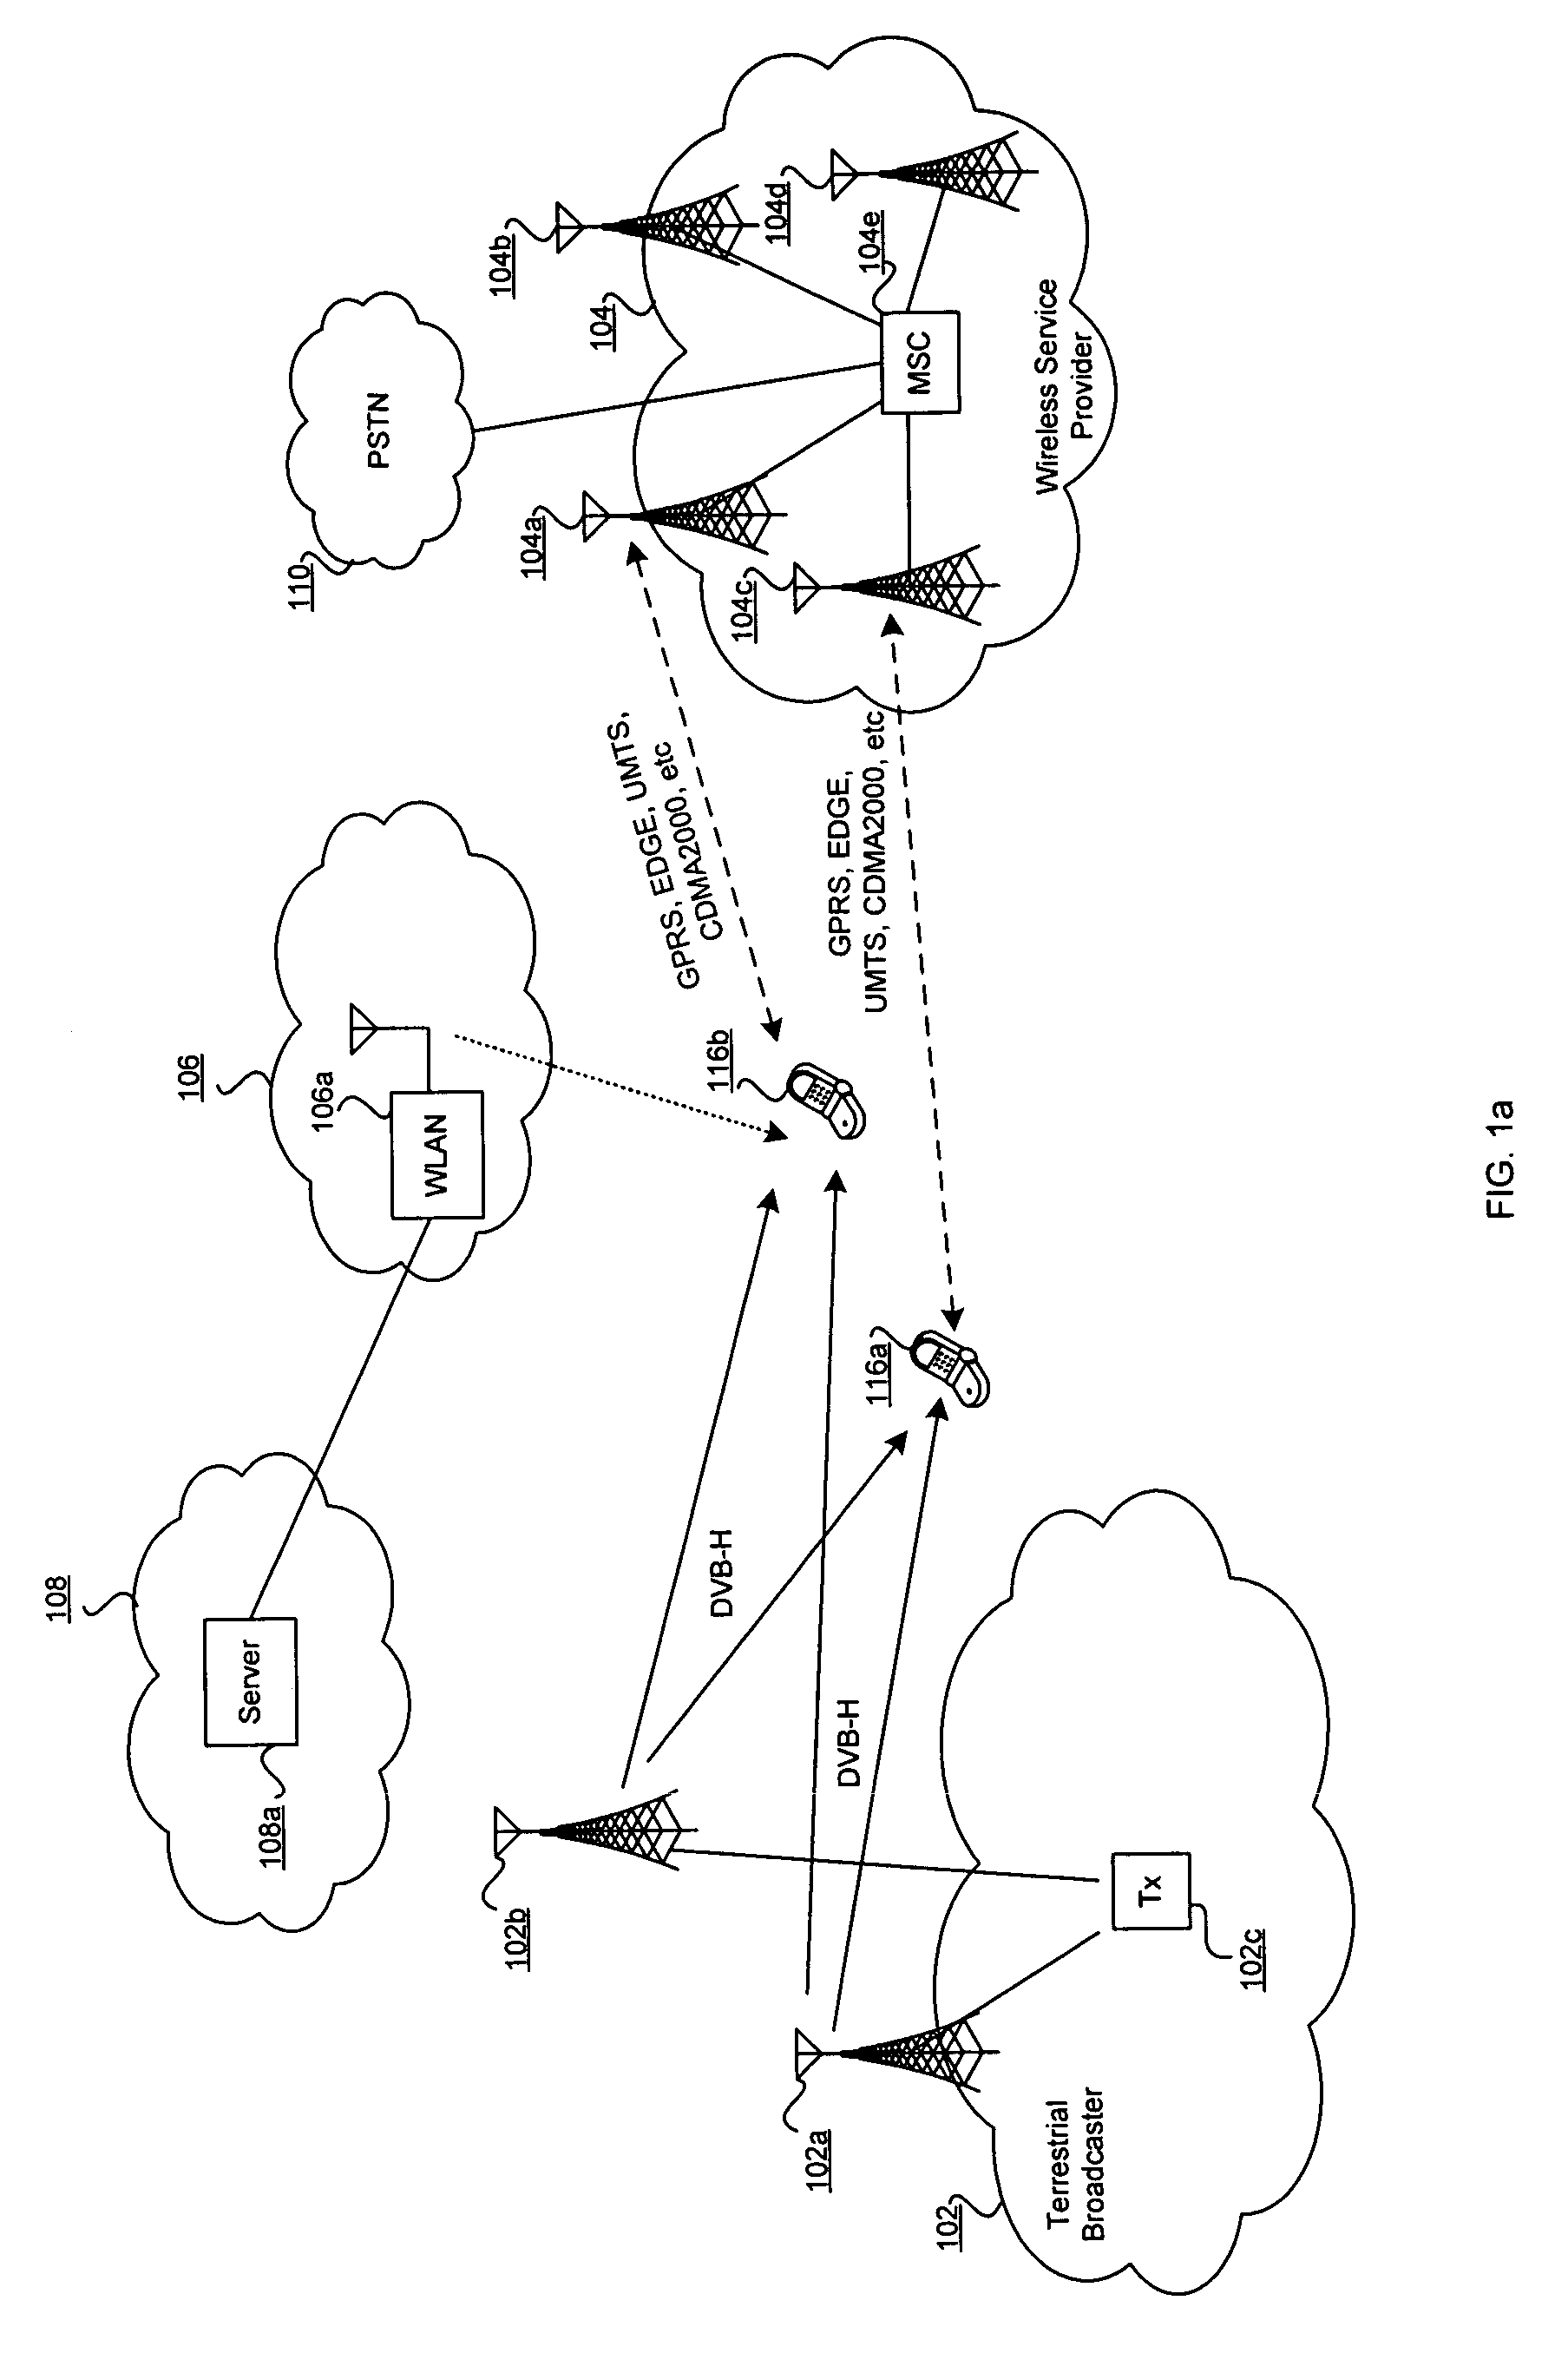 Method and system for antenna geometry for multiple antenna handsets